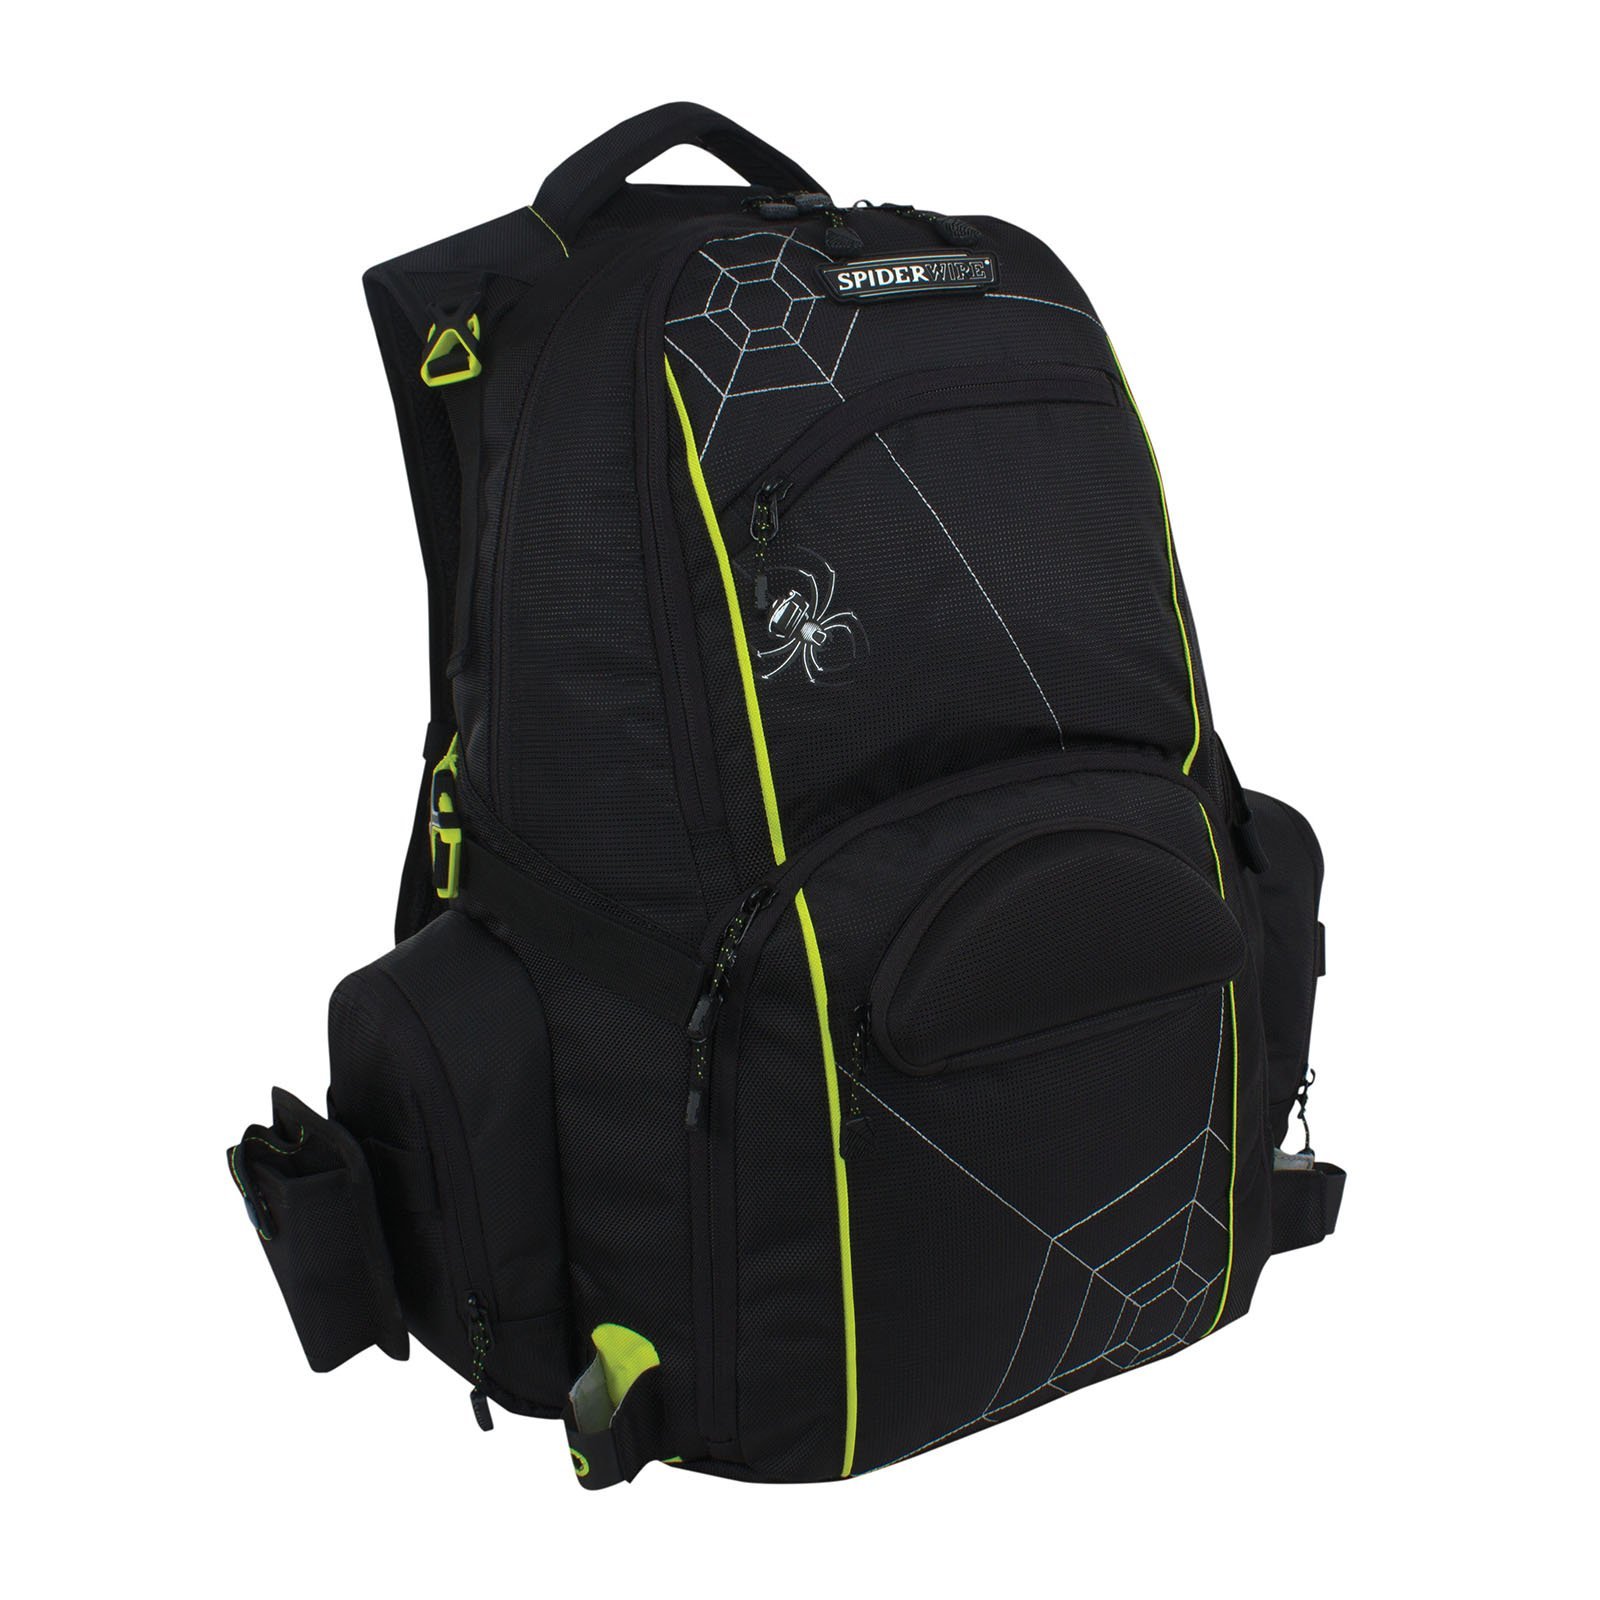 Spiderwire Fishing Tackle Backpack with 3 Medium Utility Boxes SPB006 - image 1 of 5